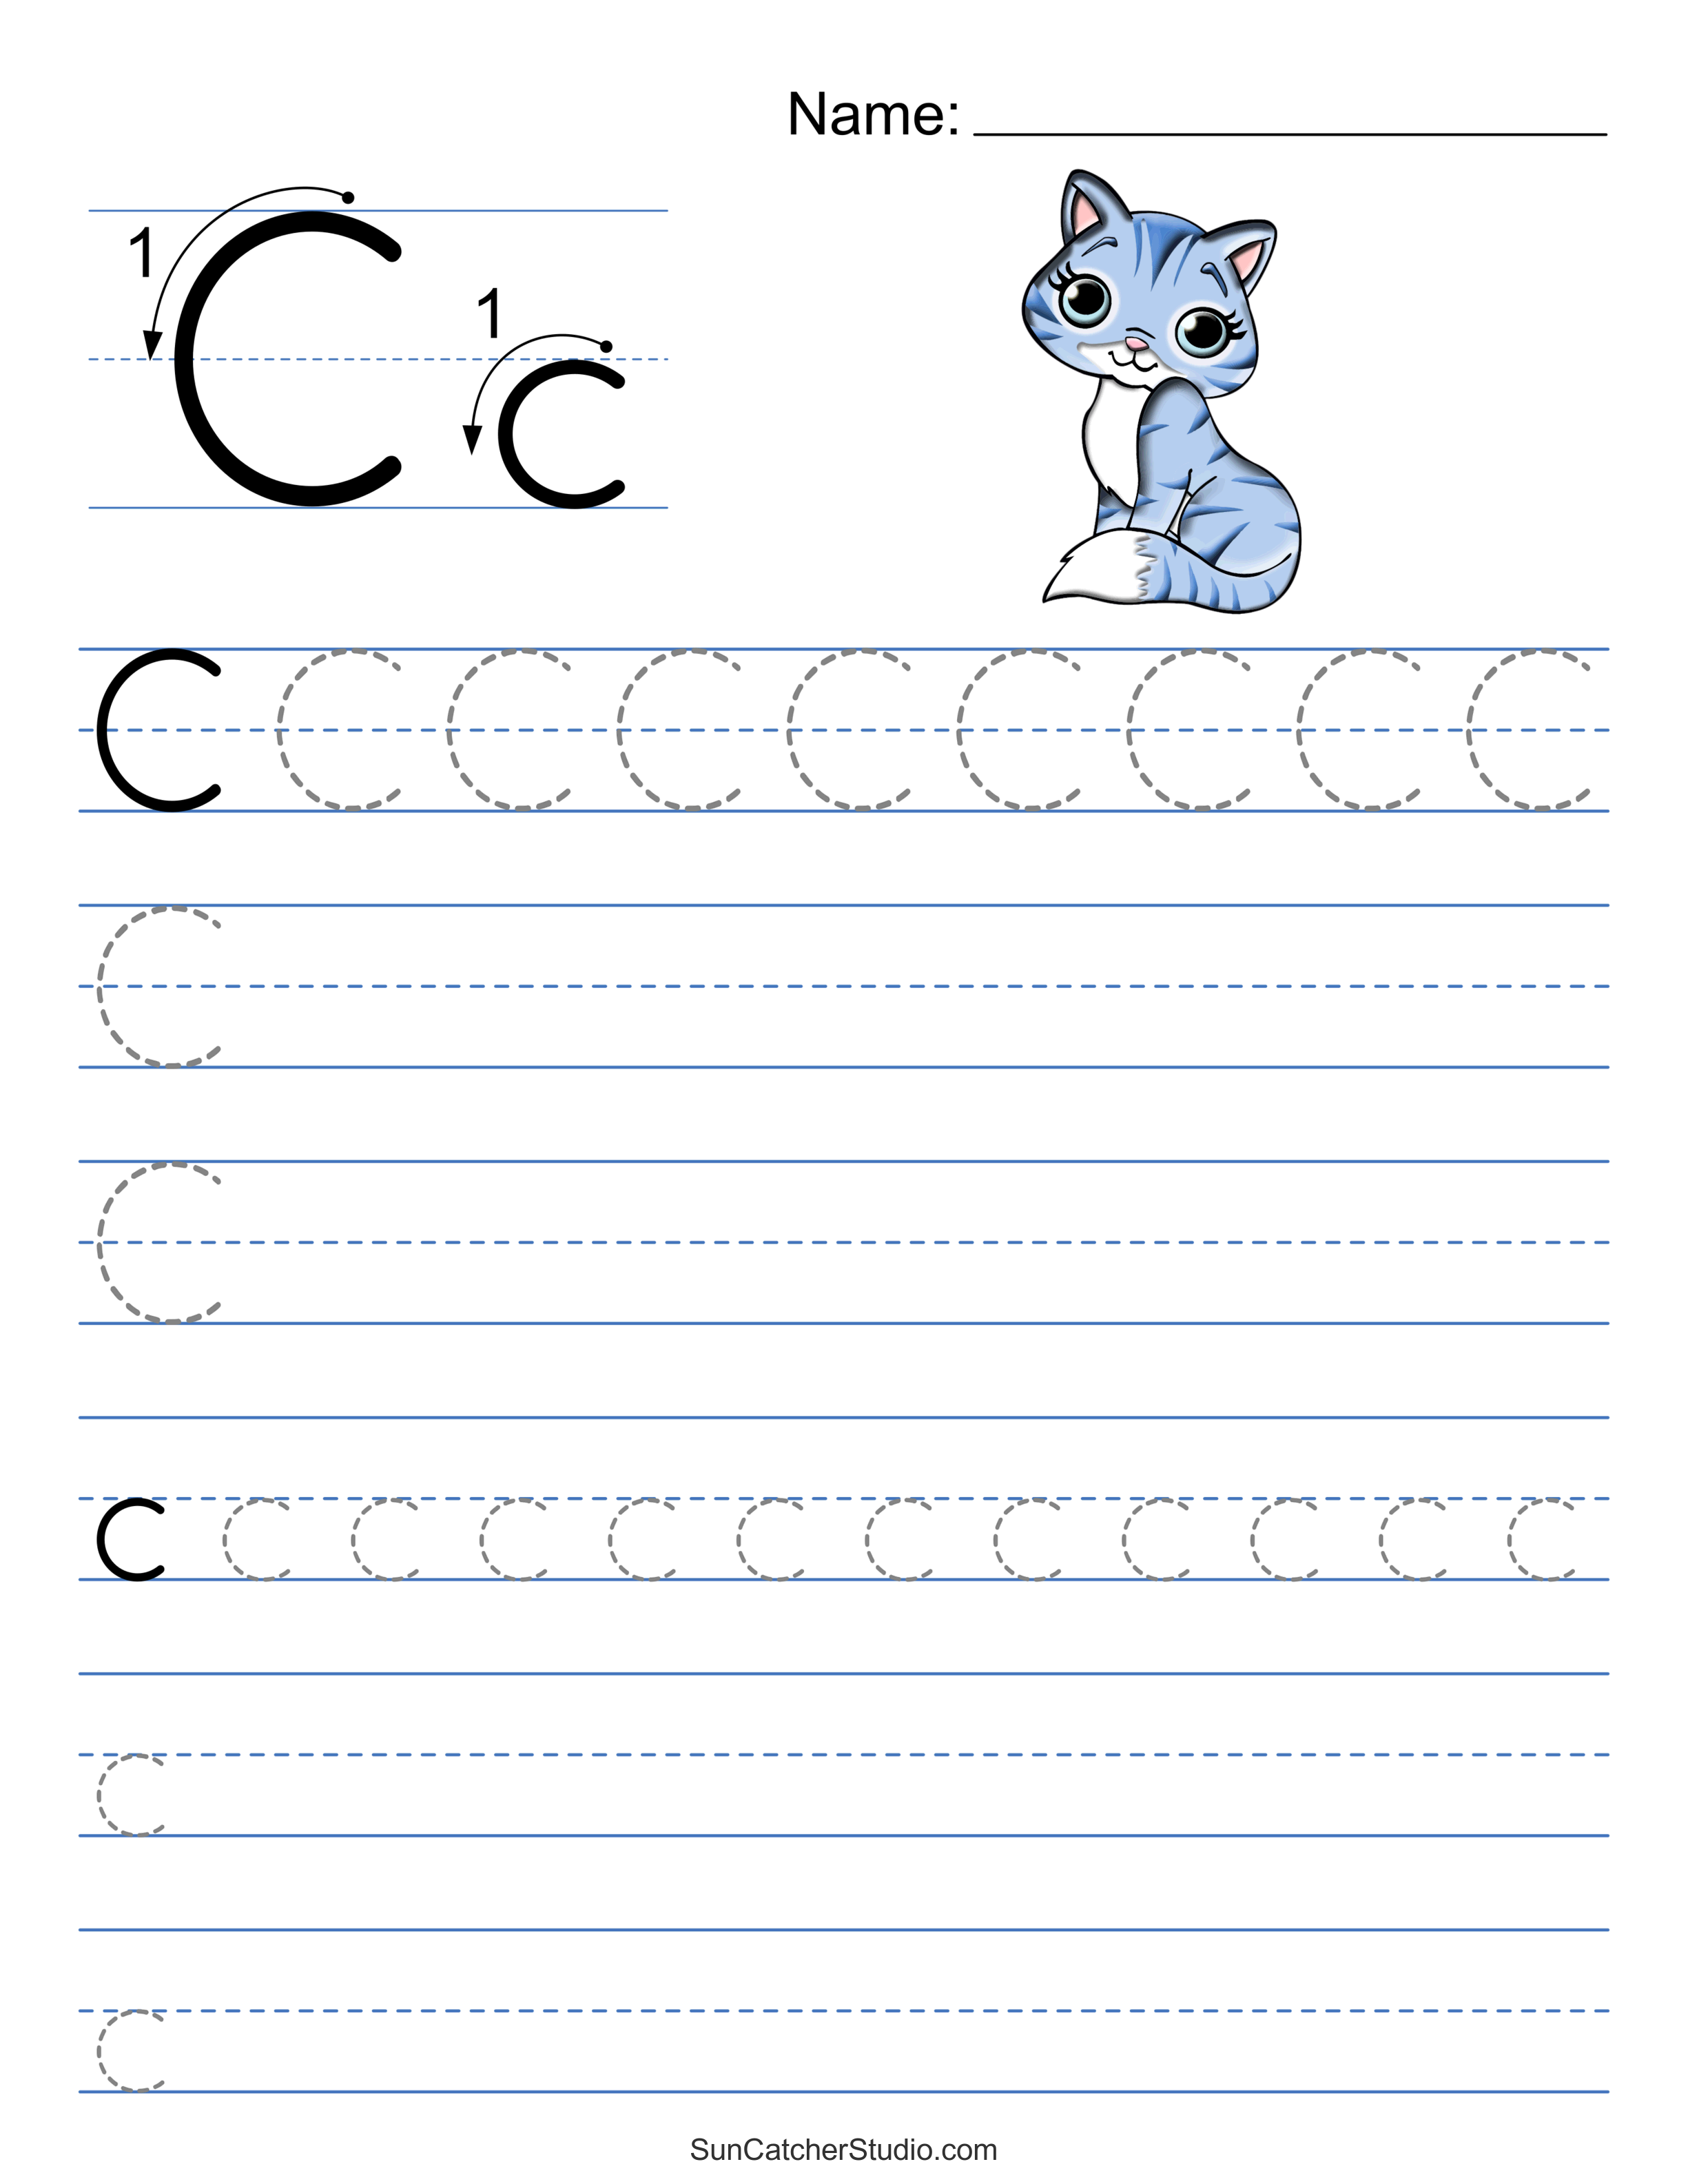 Alphabet Tracing Worksheets for Beginning Writers